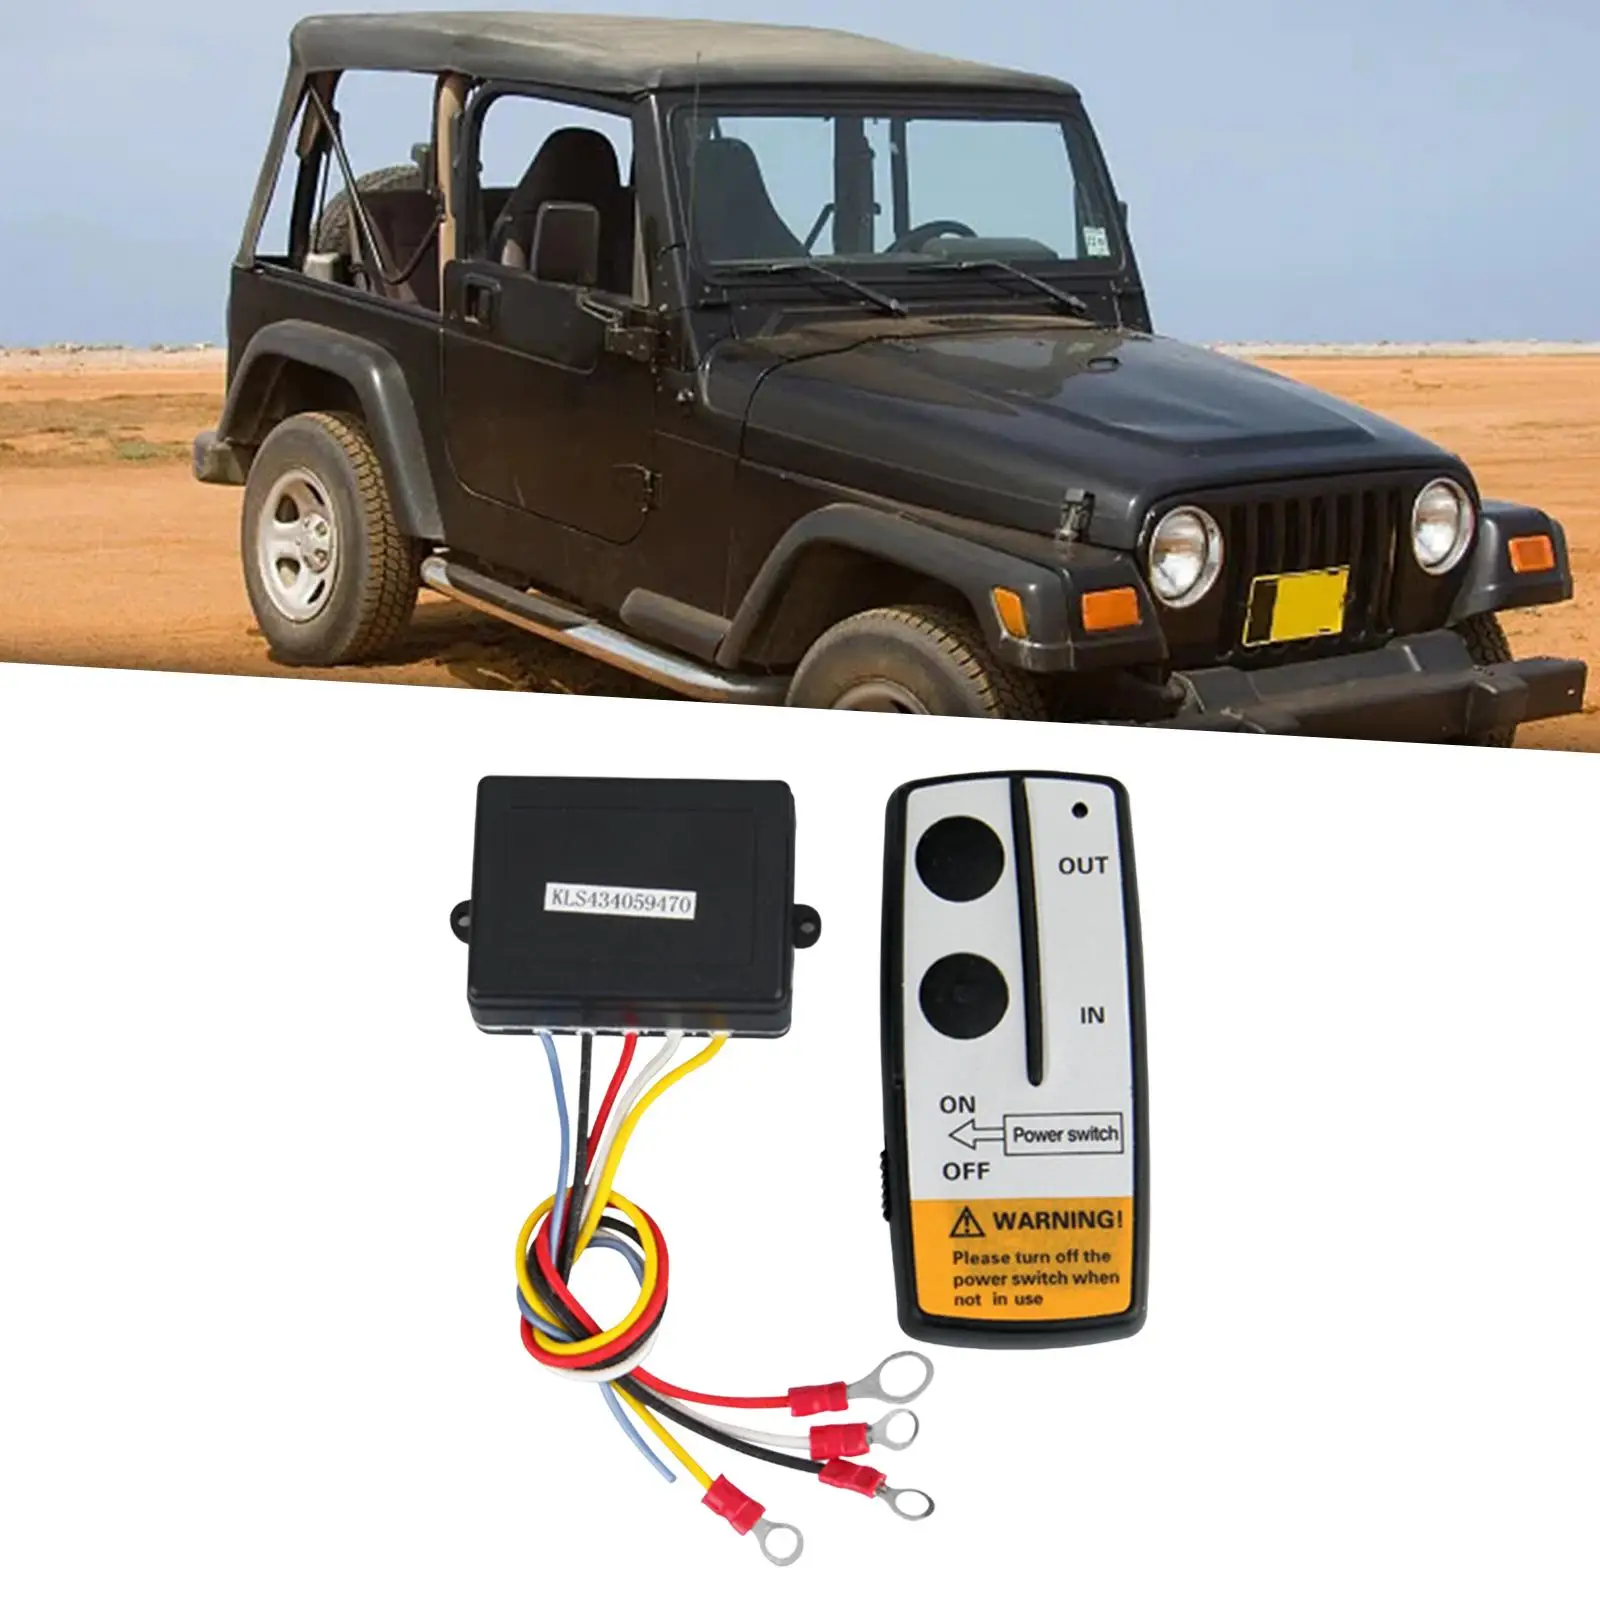 Winch Remote Control Kit 12V Durable Handset Switch for Truck SUV ATV